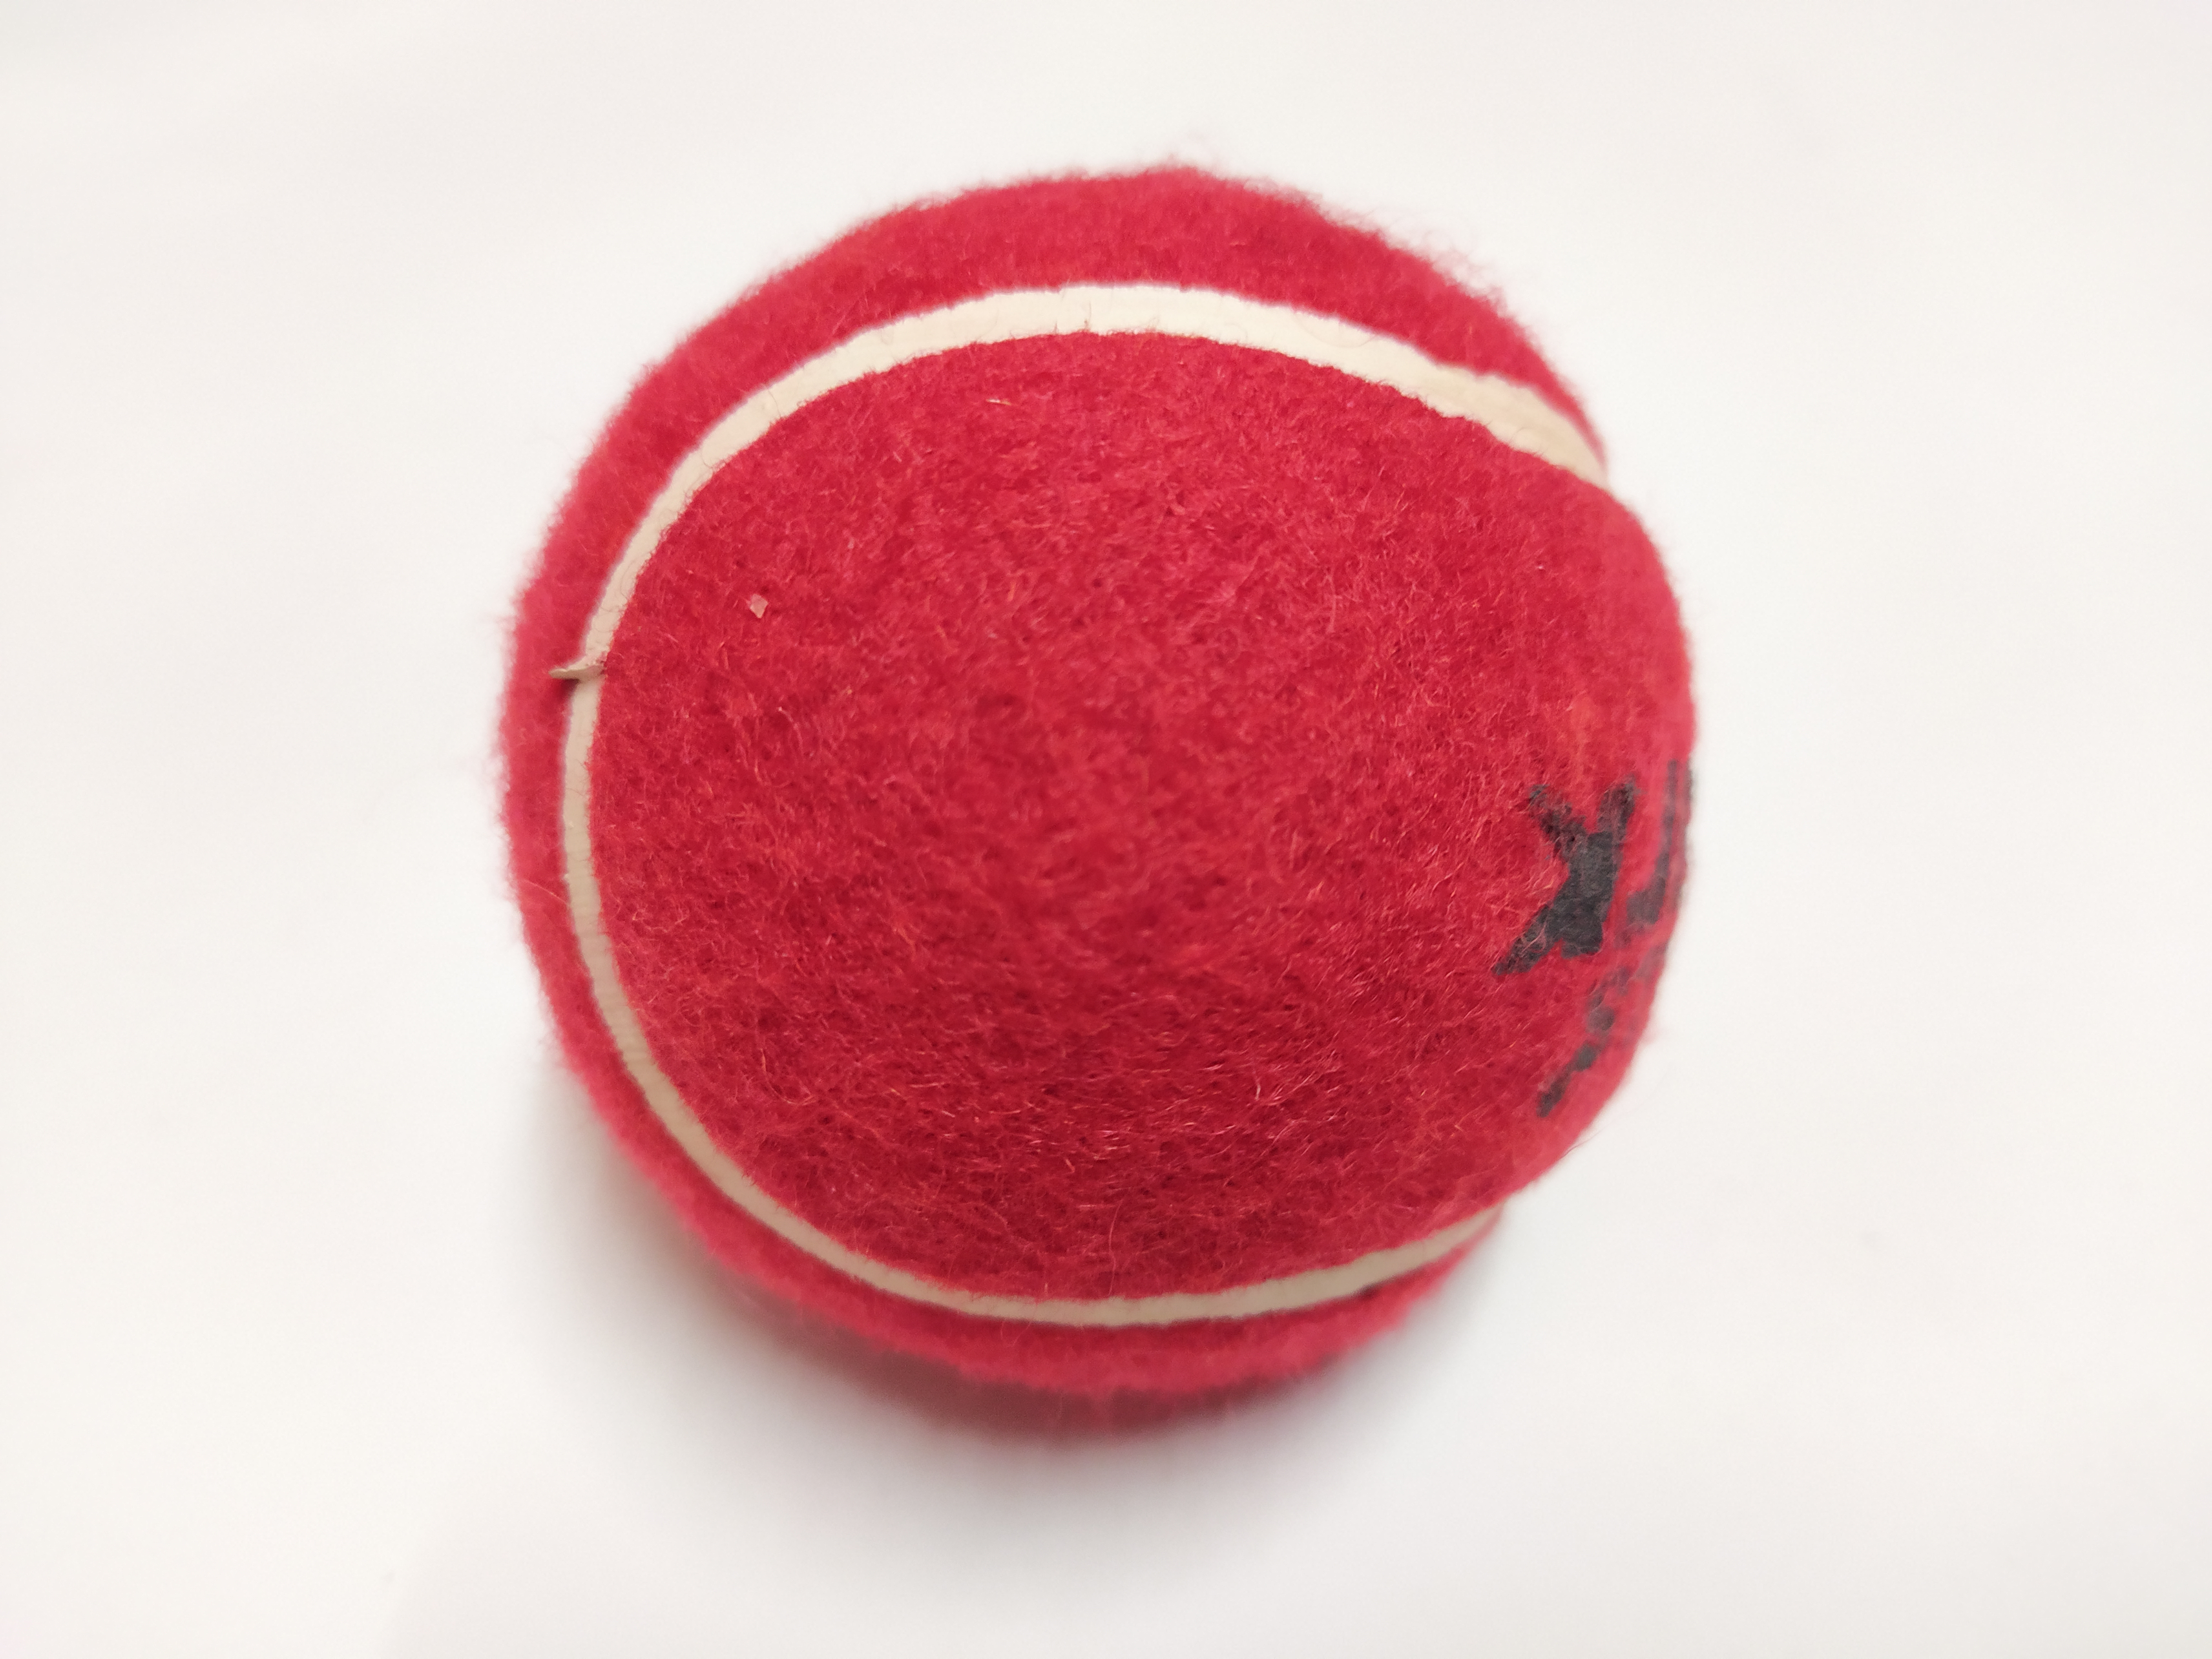 Kalindri Sports Heavy Rubber Cricket Tennis Ball Red   Pack of 3